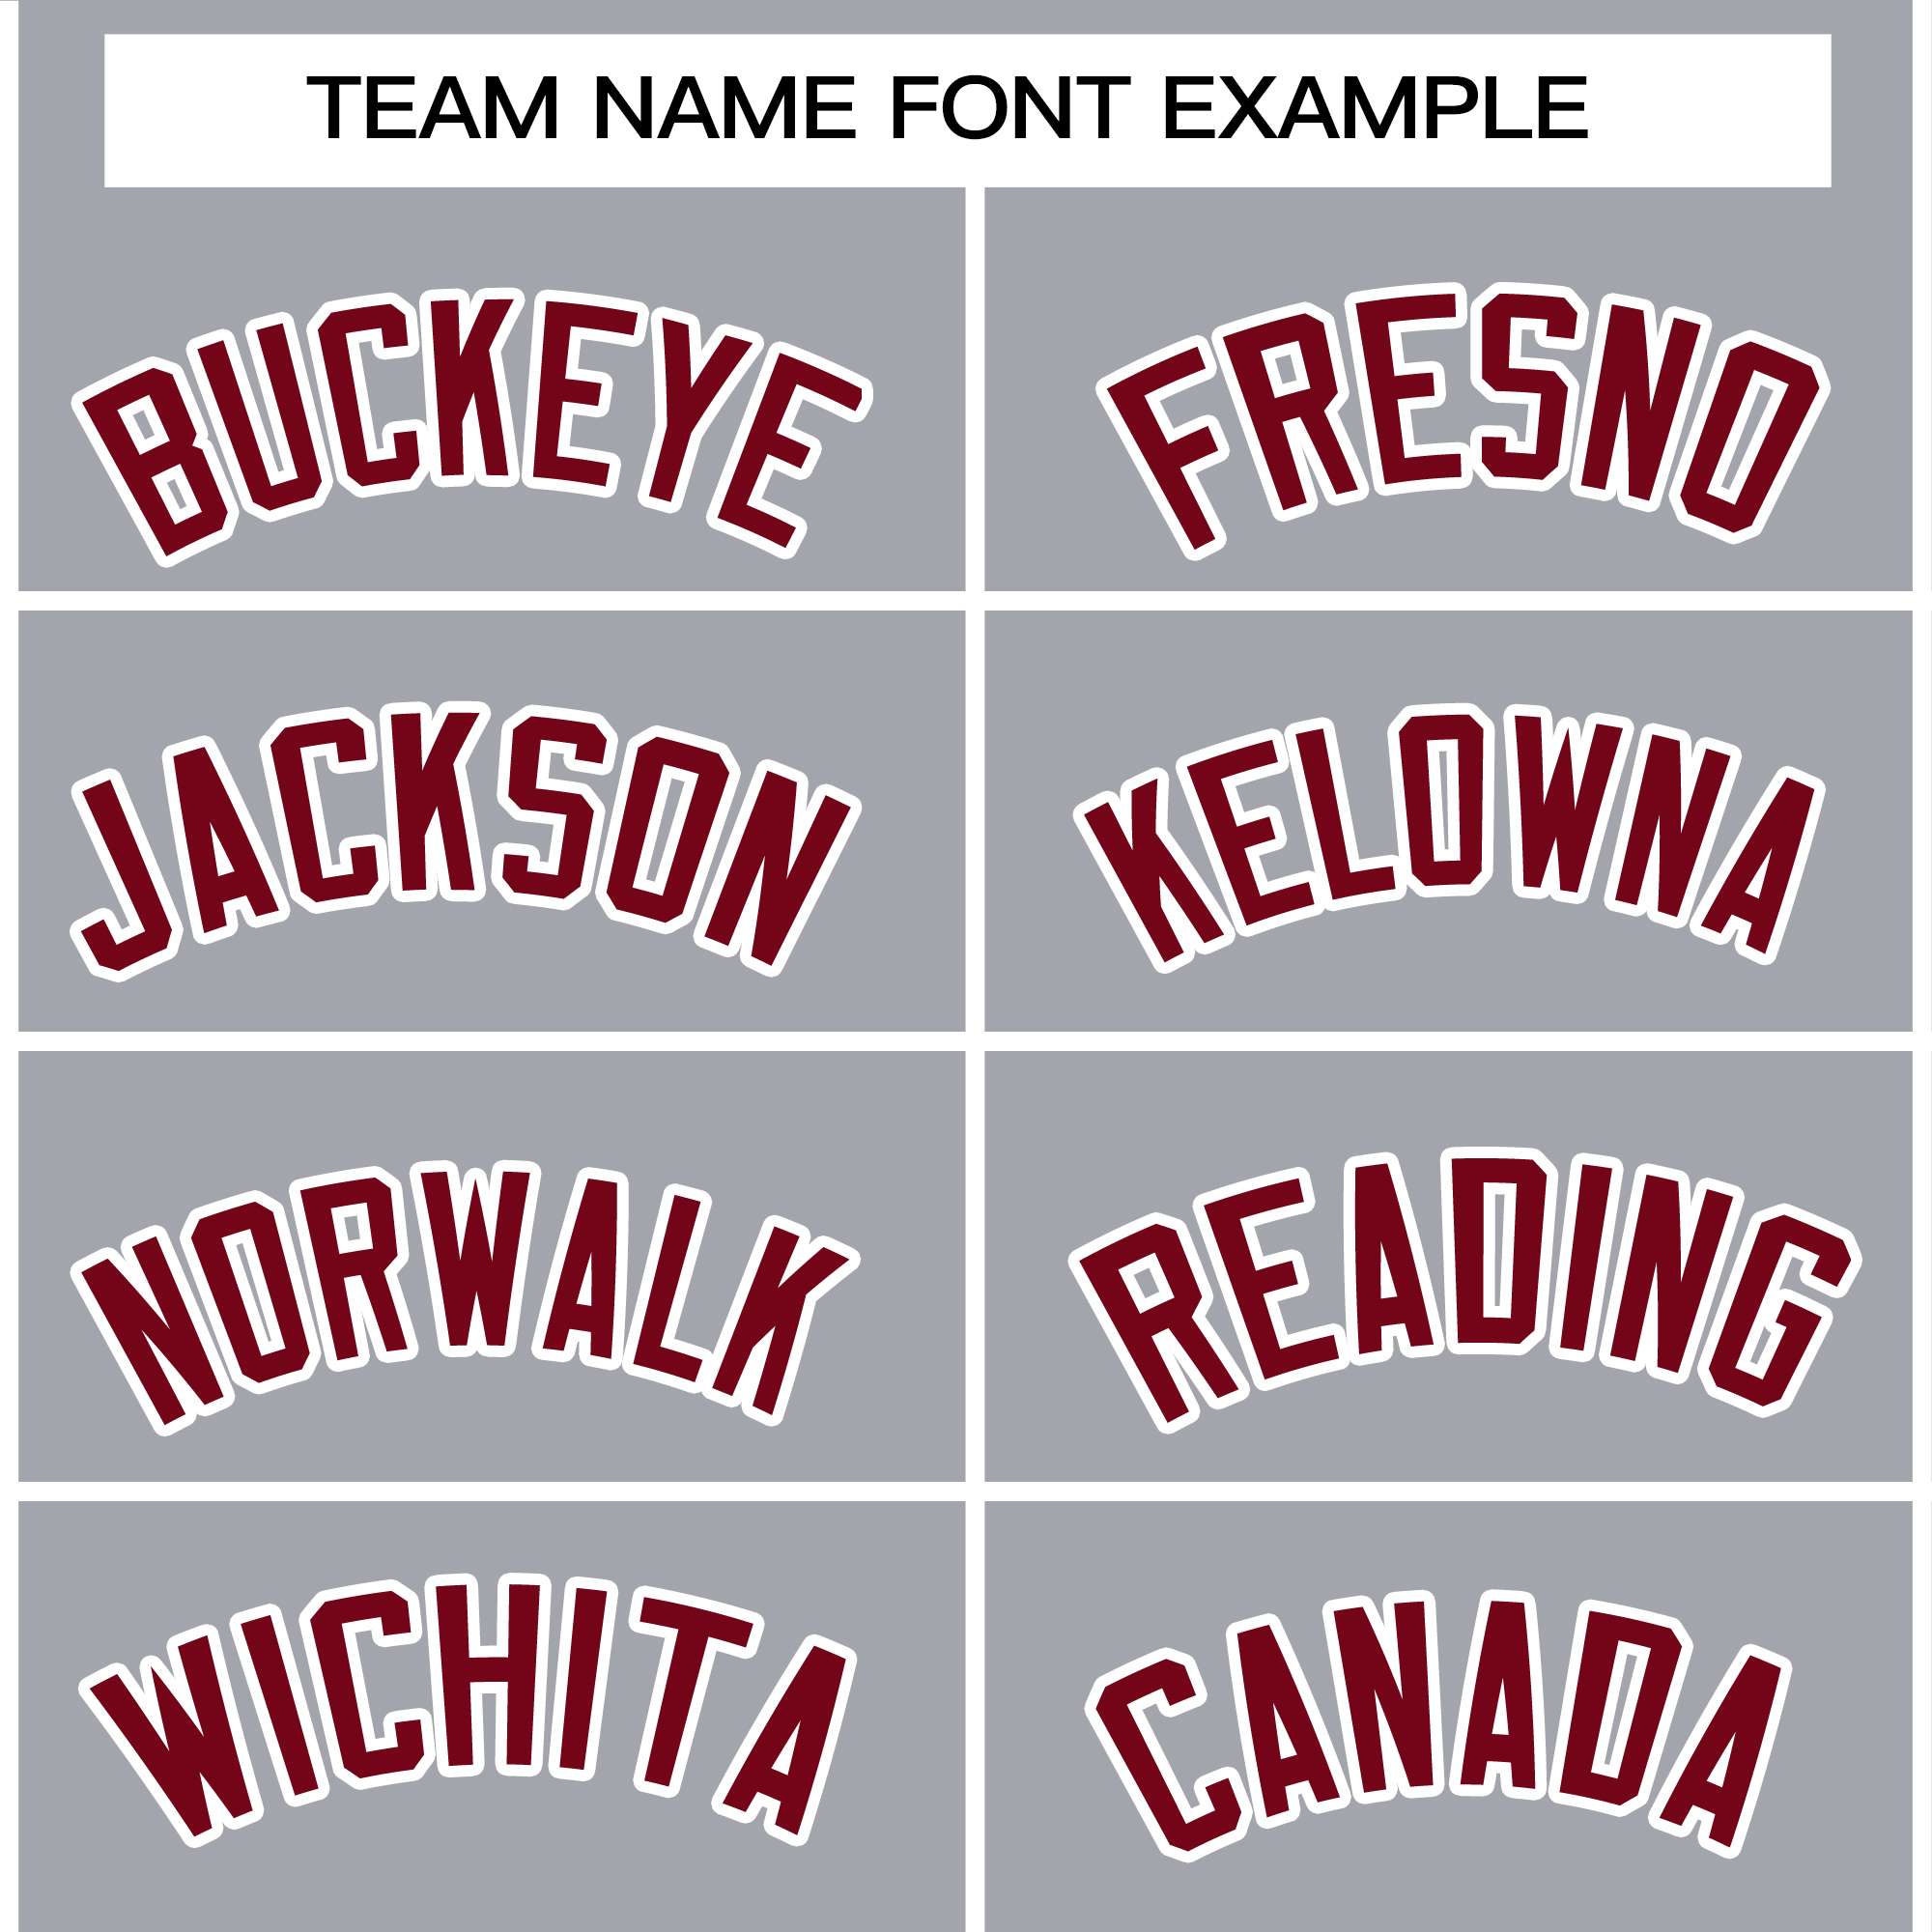 hooded tops team name font example for ladies